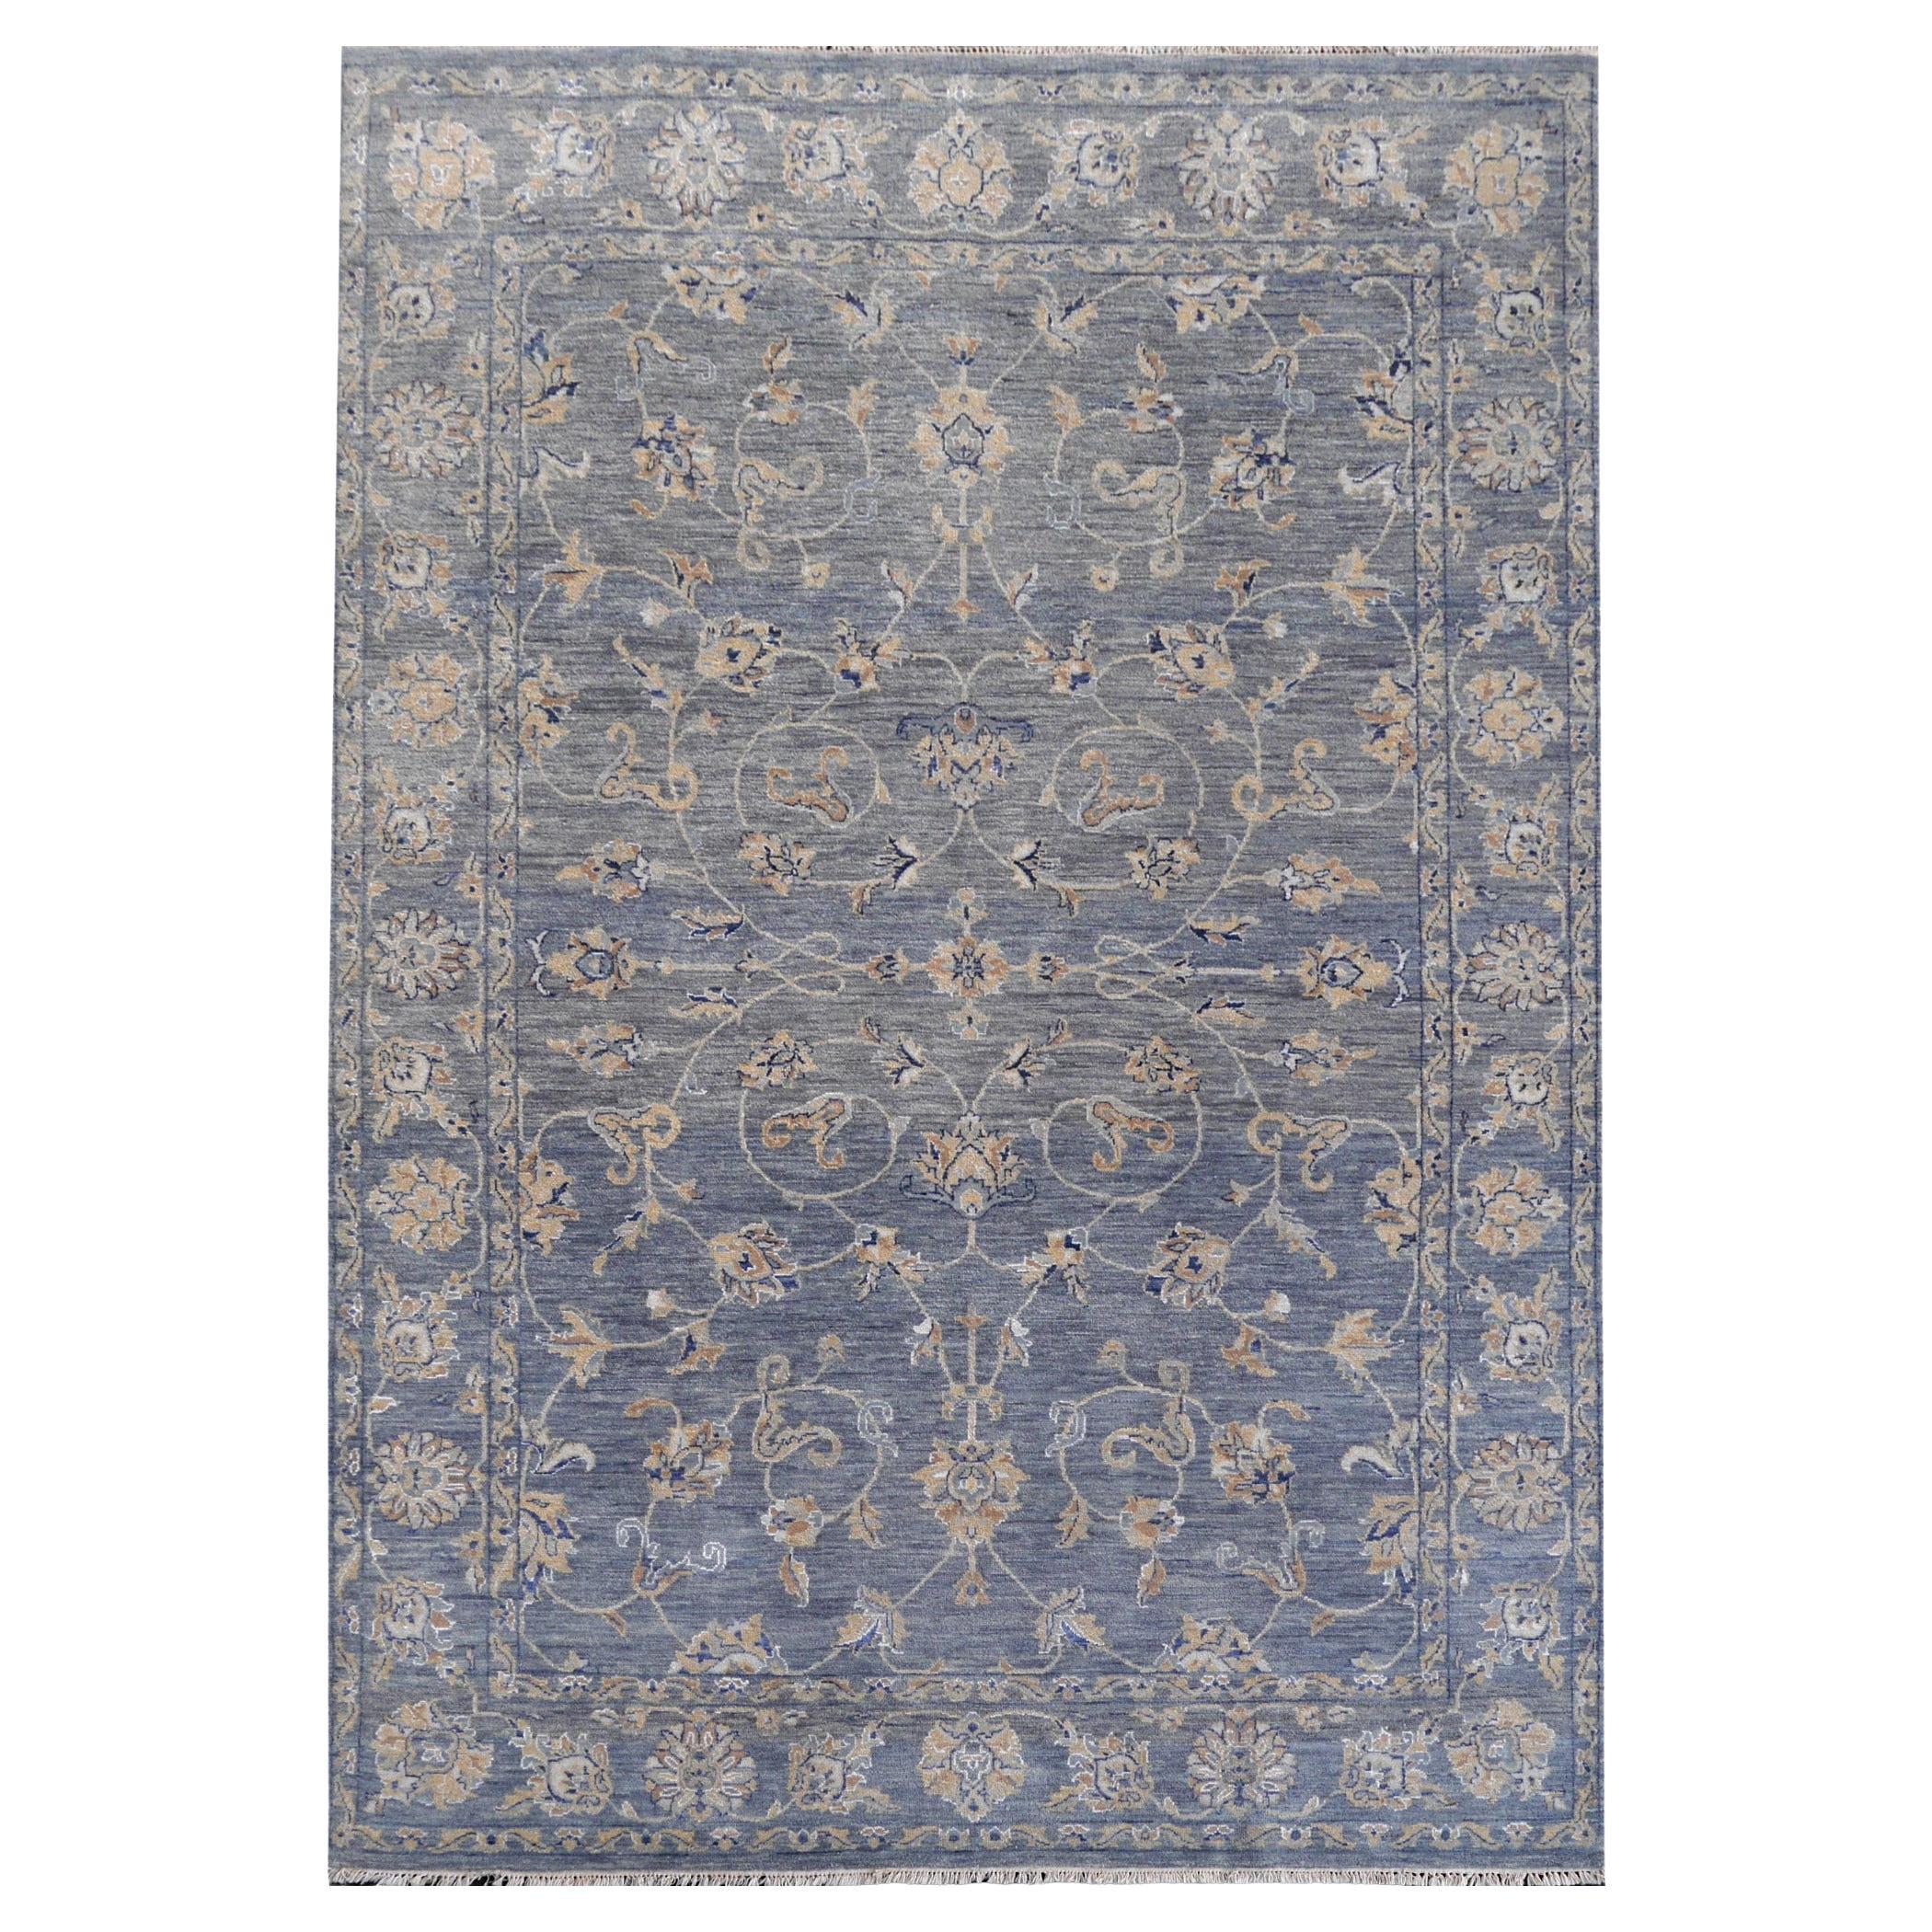 Farahan Sarouk Design Rug Contemporary Grey Blue and Beige Hand Knotted For Sale